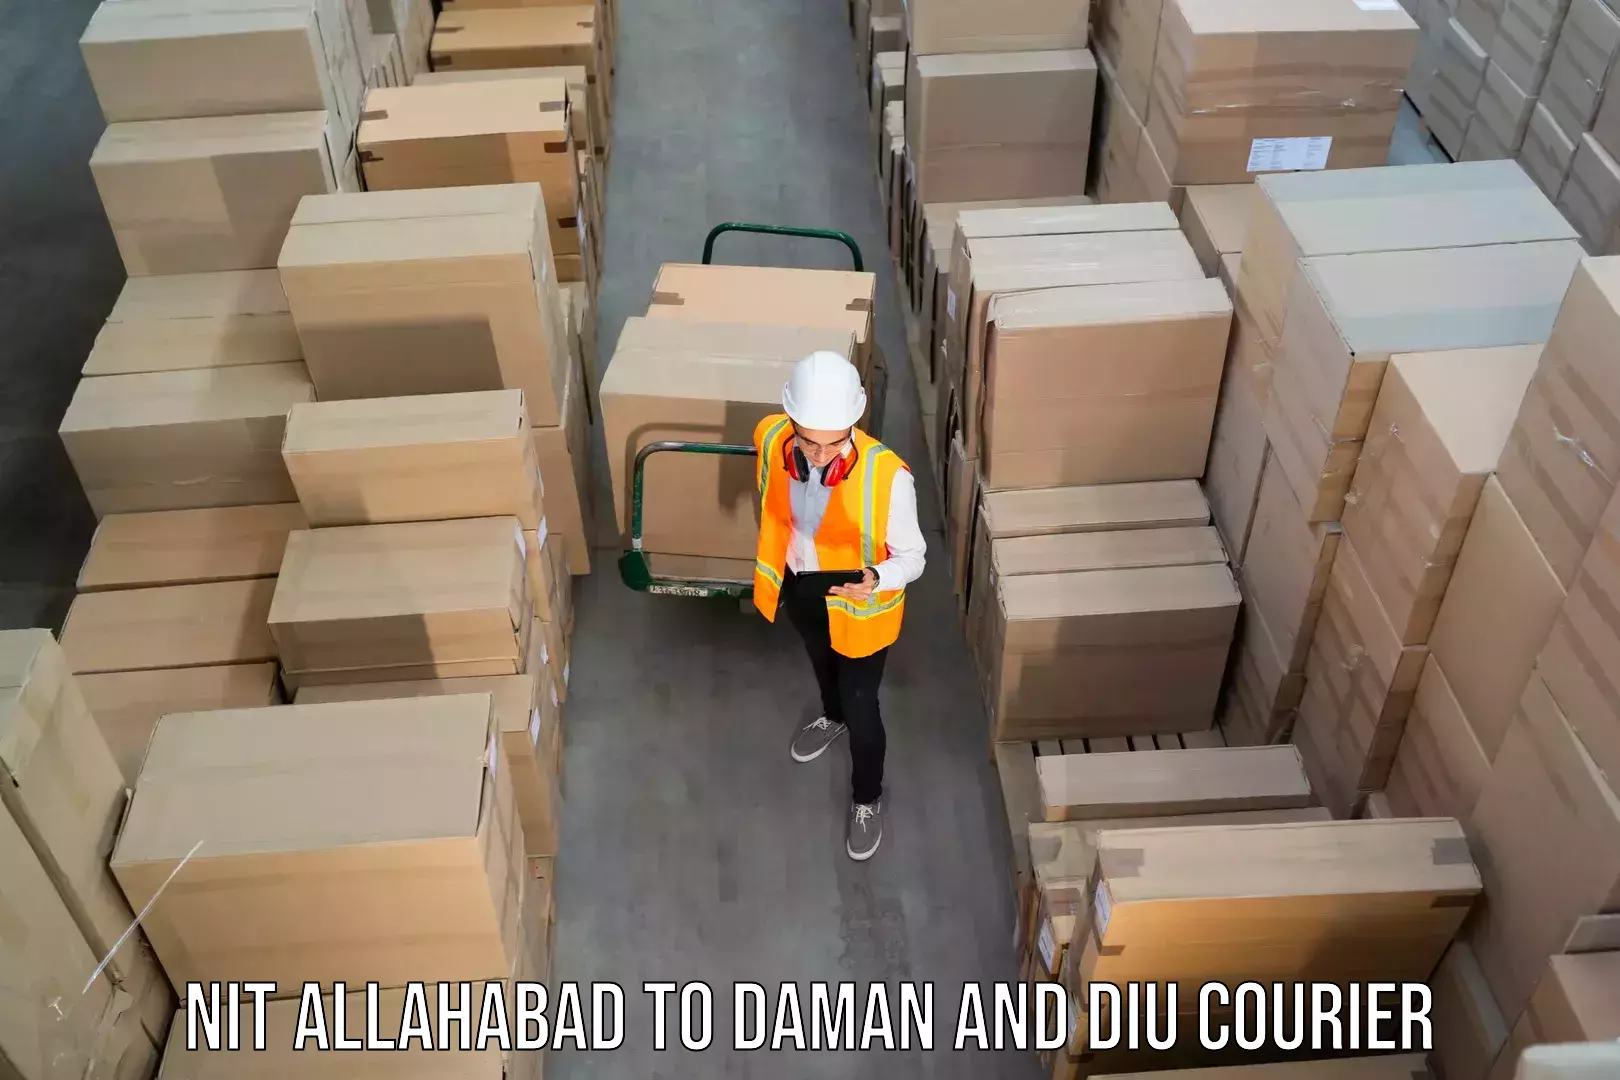 Affordable parcel service NIT Allahabad to Daman